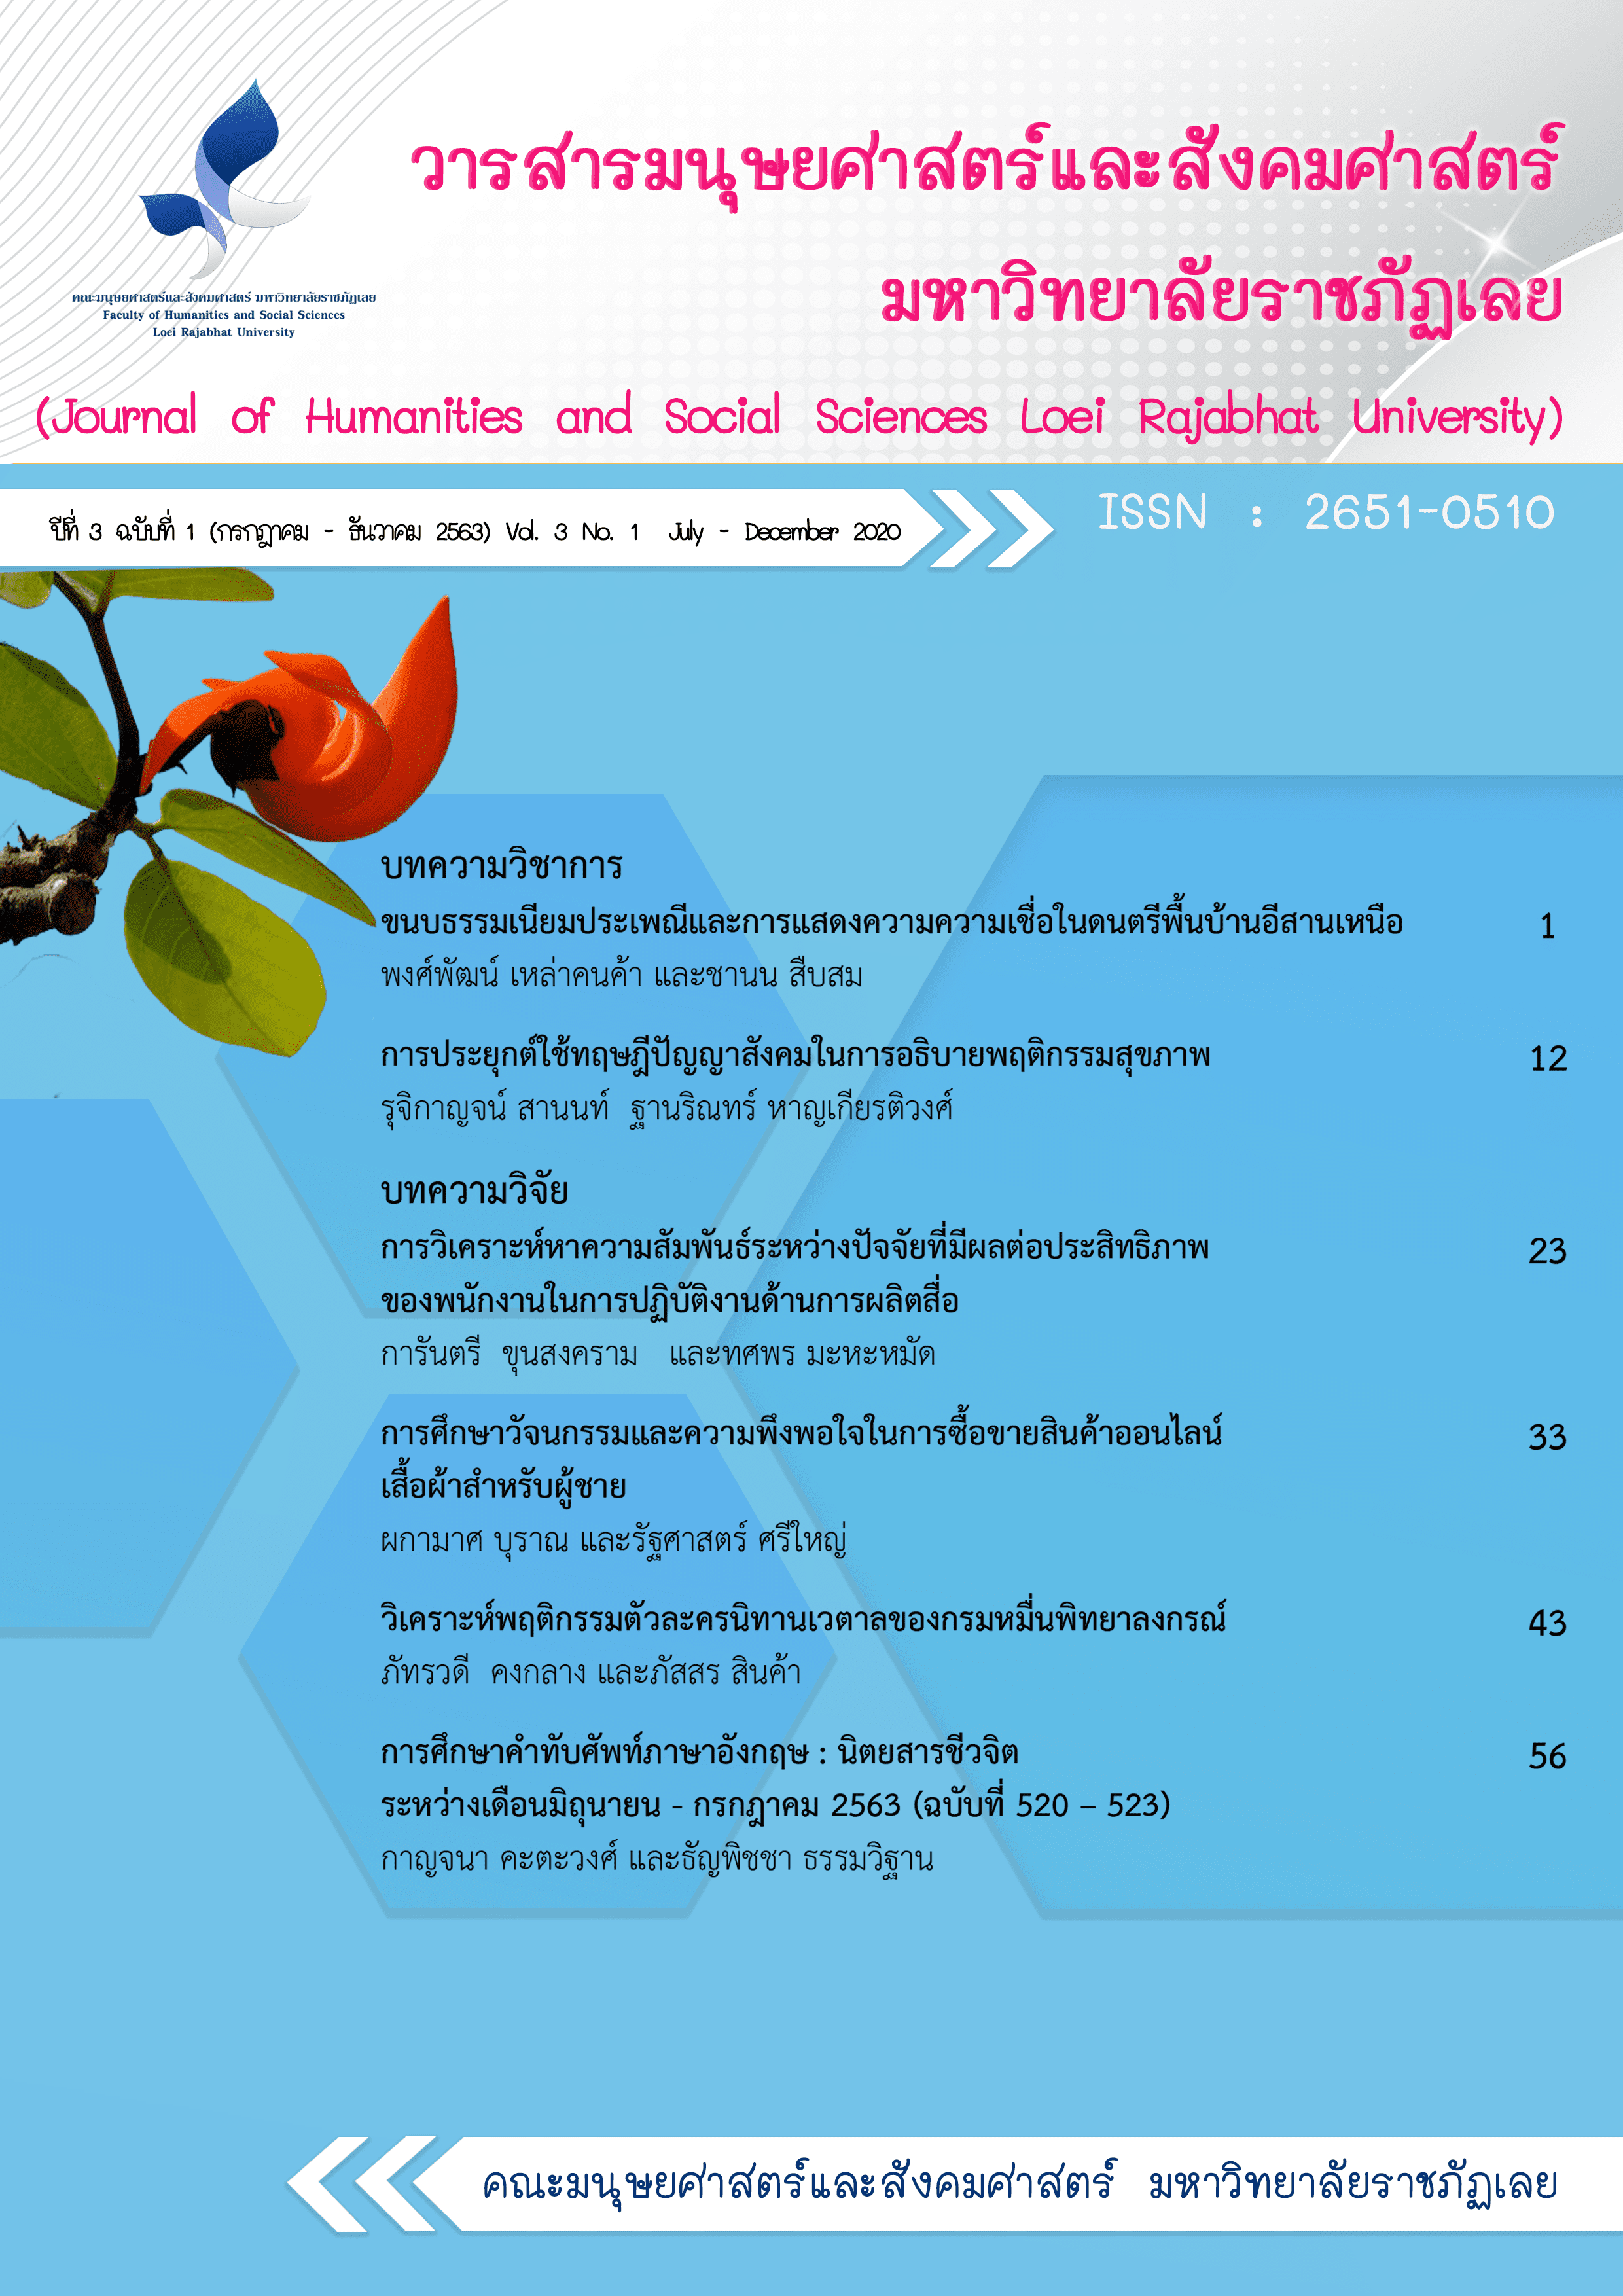 					View Vol. 3 No. 1 (2563): Journal of Humanities and Social Sciences Loei Rajabhat University Vol. 3 No. 1 July - December 2020
				